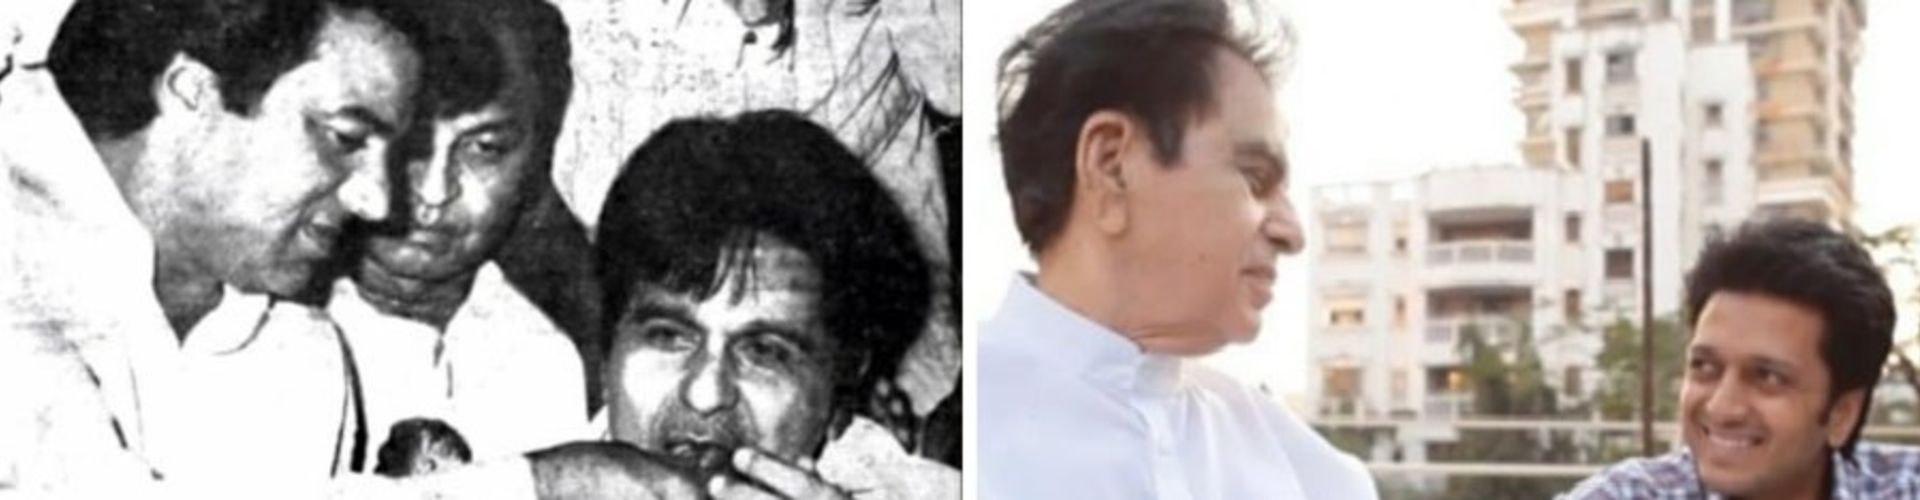 B-Town Showers Their Blessings and Wishes, As Dilip Kumar Turns 98 Today